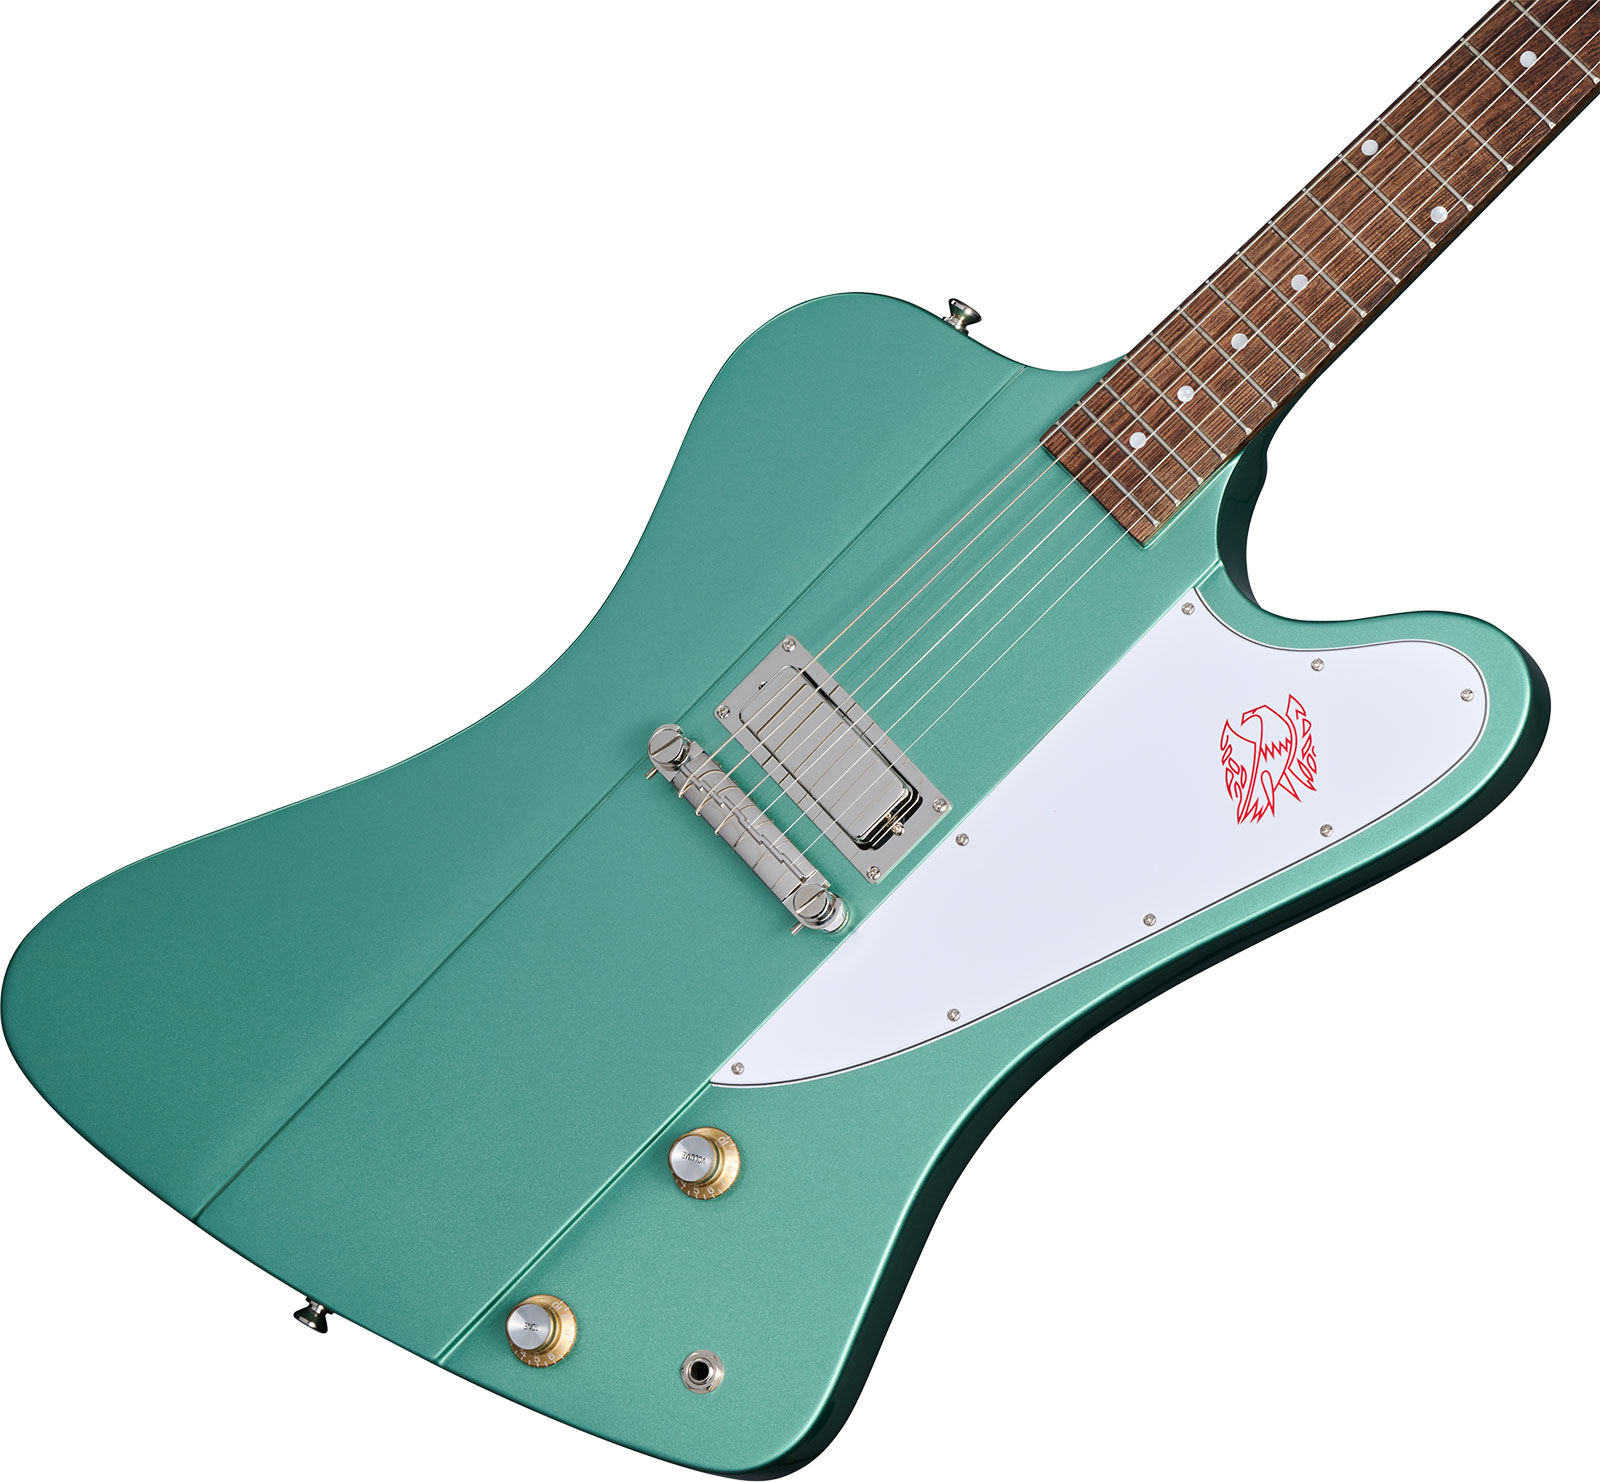 Epiphone Firebird I 1963 Inspired By Gibson Custom 1mh Ht Lau - Inverness Green - Retro rock electric guitar - Variation 3